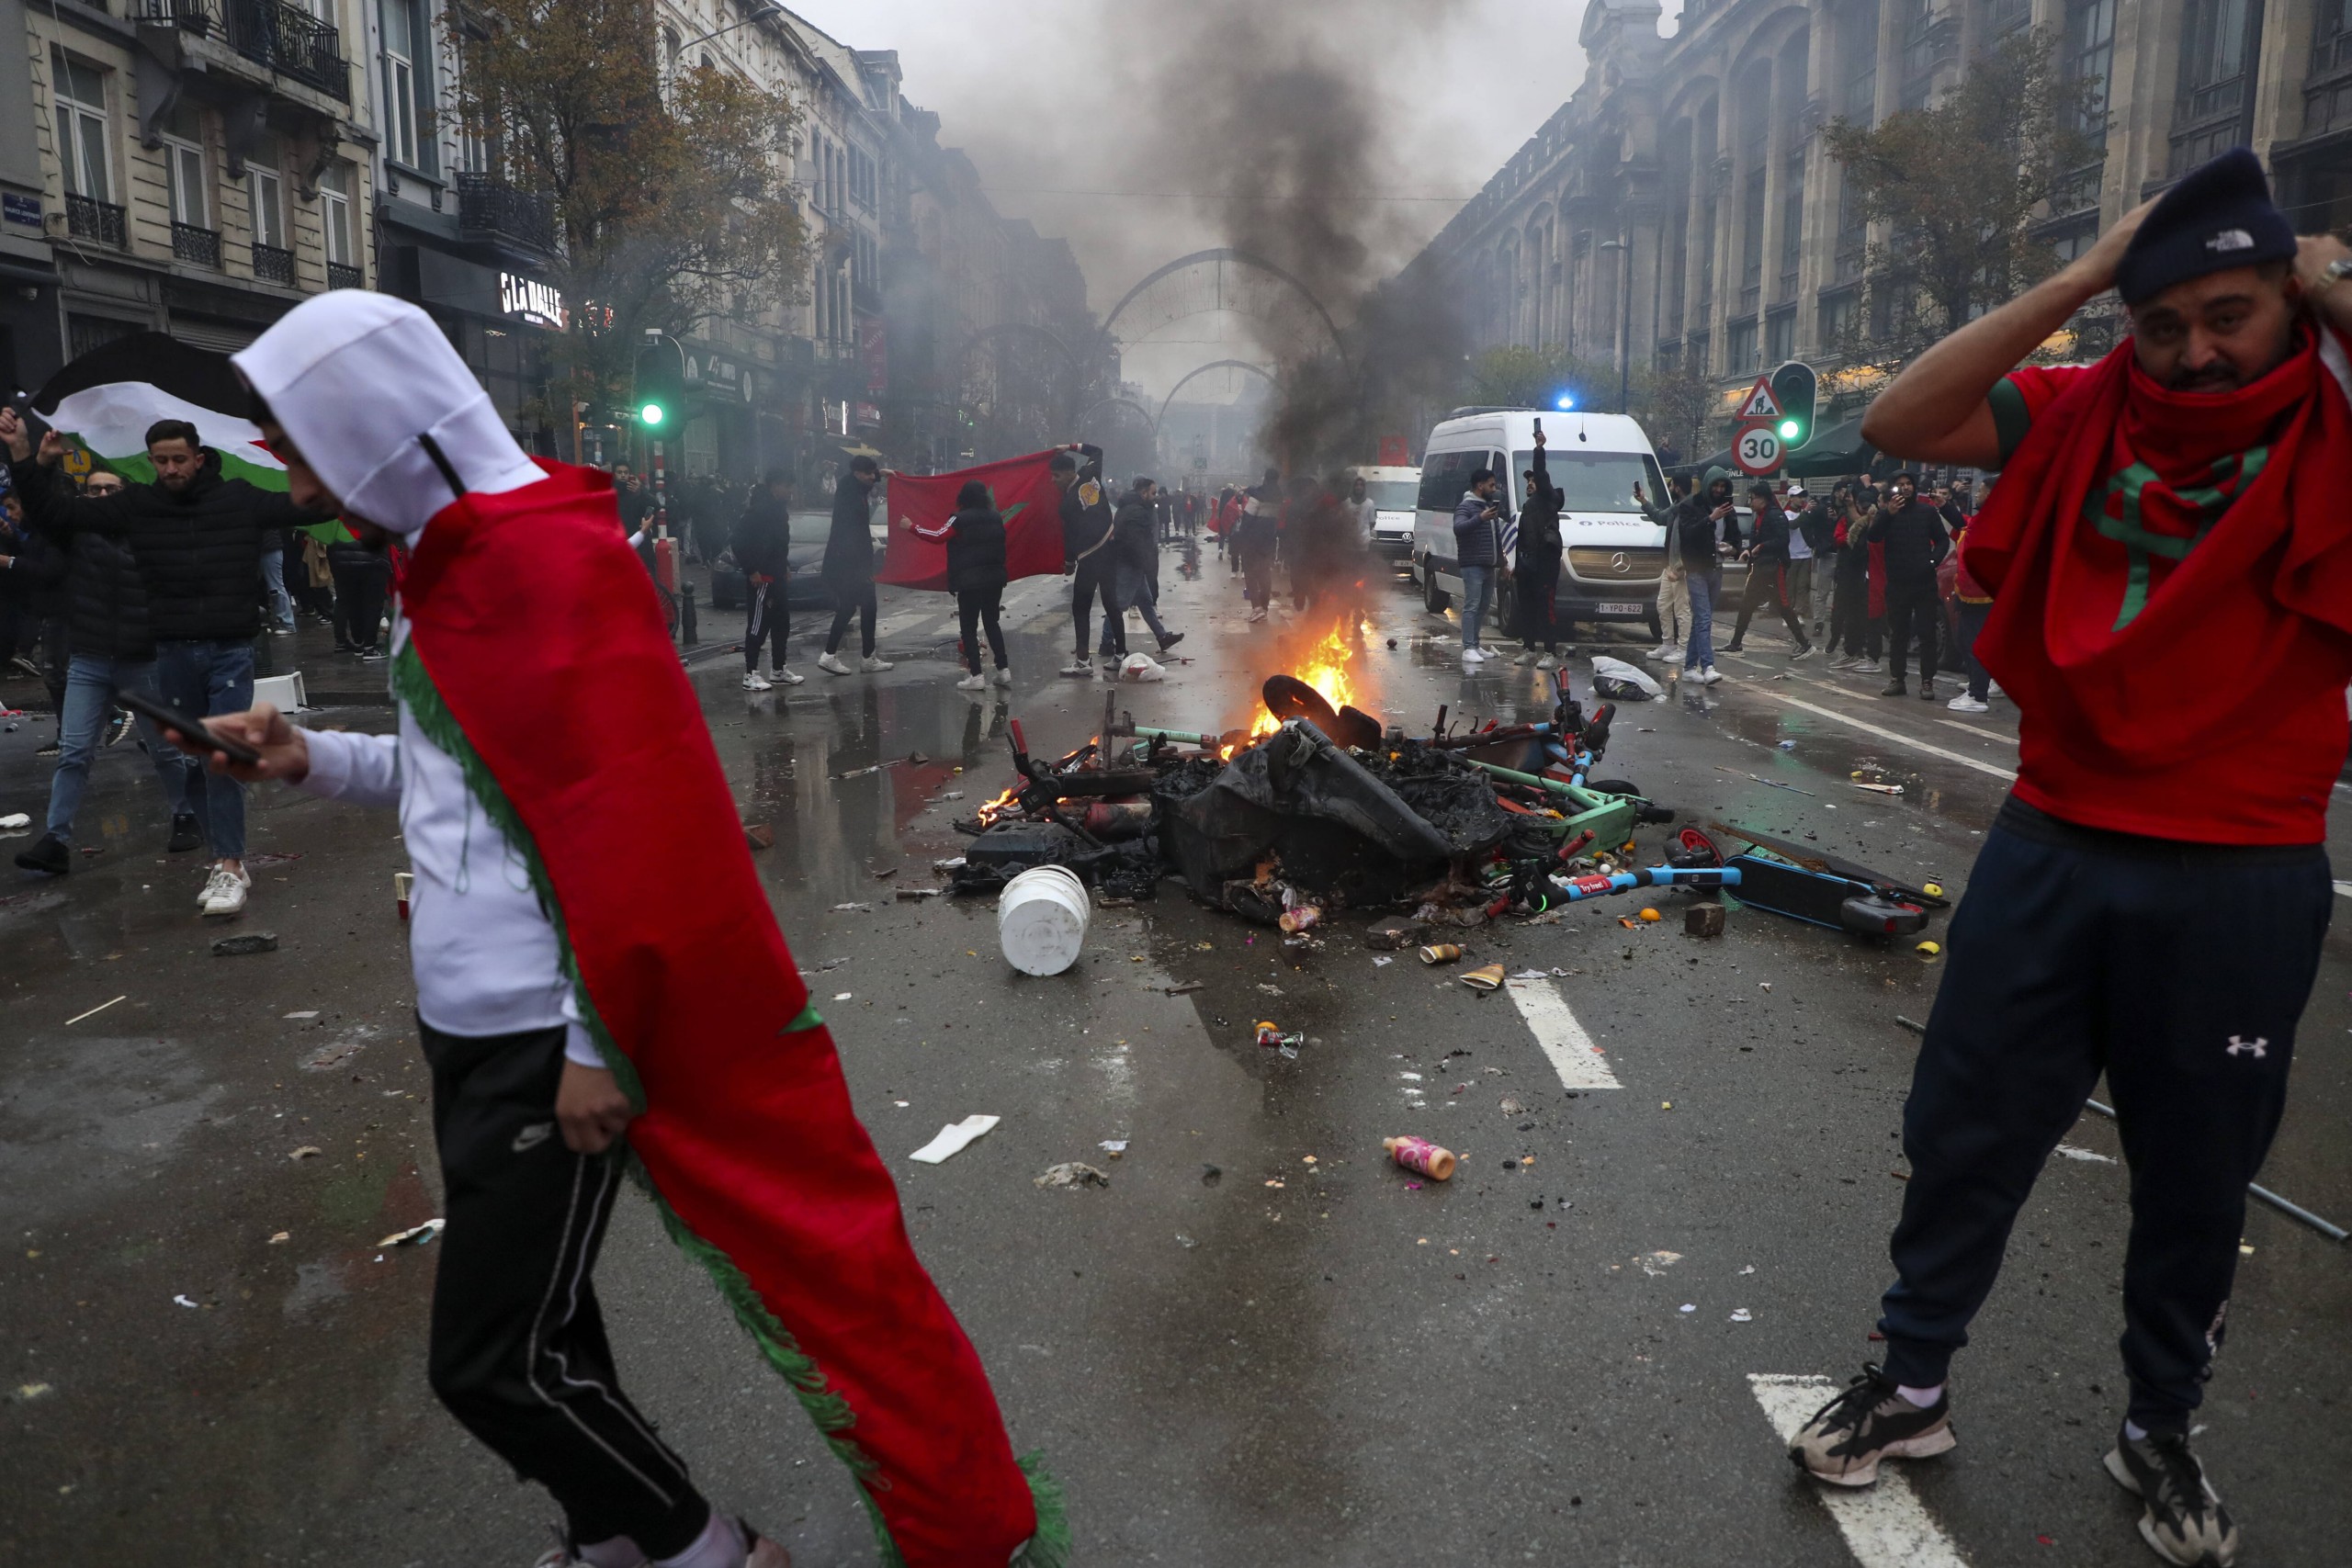 Illustration picture shows incidents during the celebrations of Moroccan supporters and police forces present in the center of Brussels, during a soccer game between Belgium s national team, Nationalteam the Red Devils and Morocco, in Group F of the FIFA 2022 World Cup, on Sunday 27 November 2022. NICOLASxMAETERLINCK PUBLICATIONxNOTxINxBELxFRAxNED x54153232x